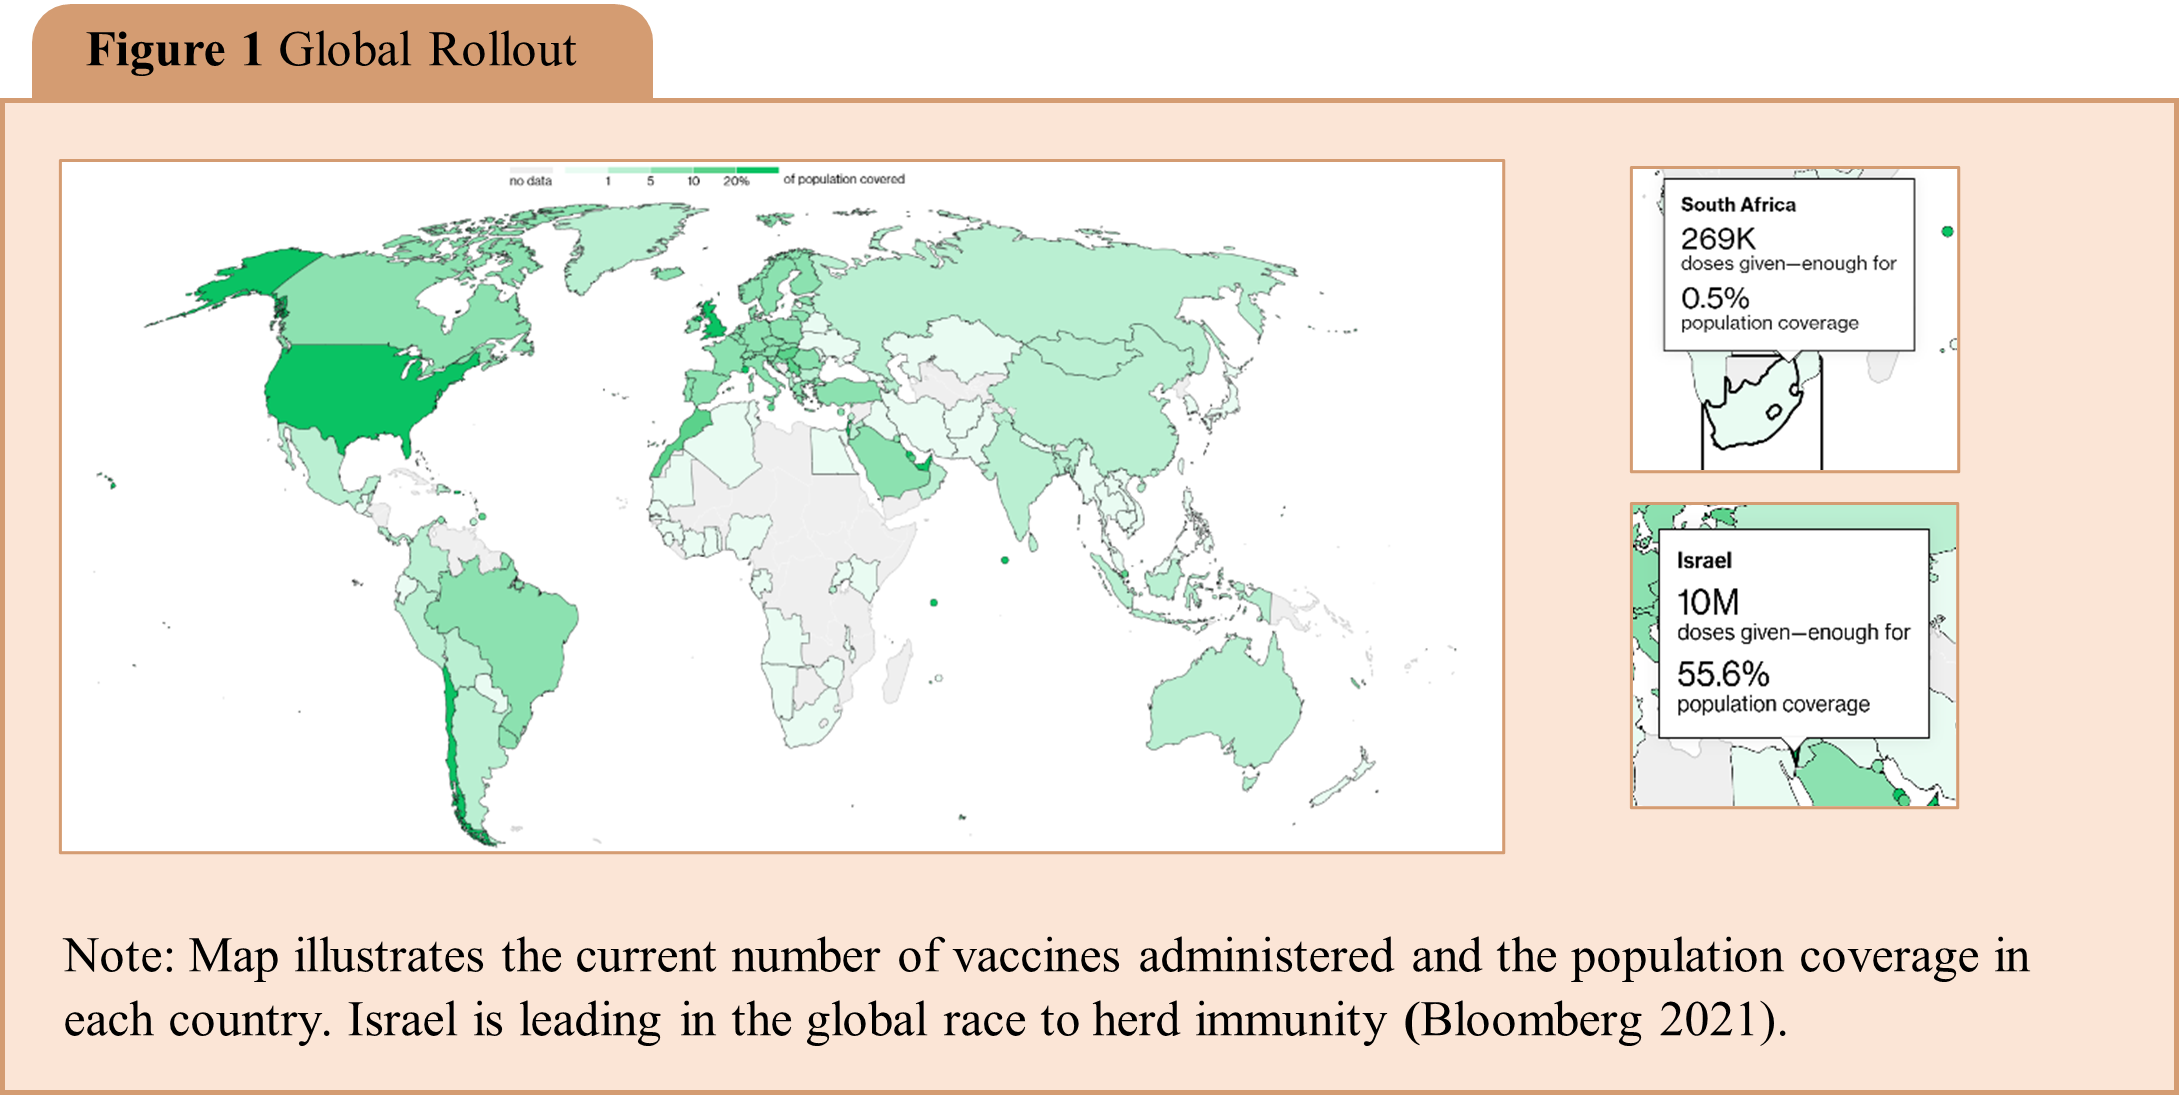 Note: Map illustrates the current number of vaccines administered and the population coverage in each country. Israel is leading in the global race to herd immunity (Bloomberg 2021).